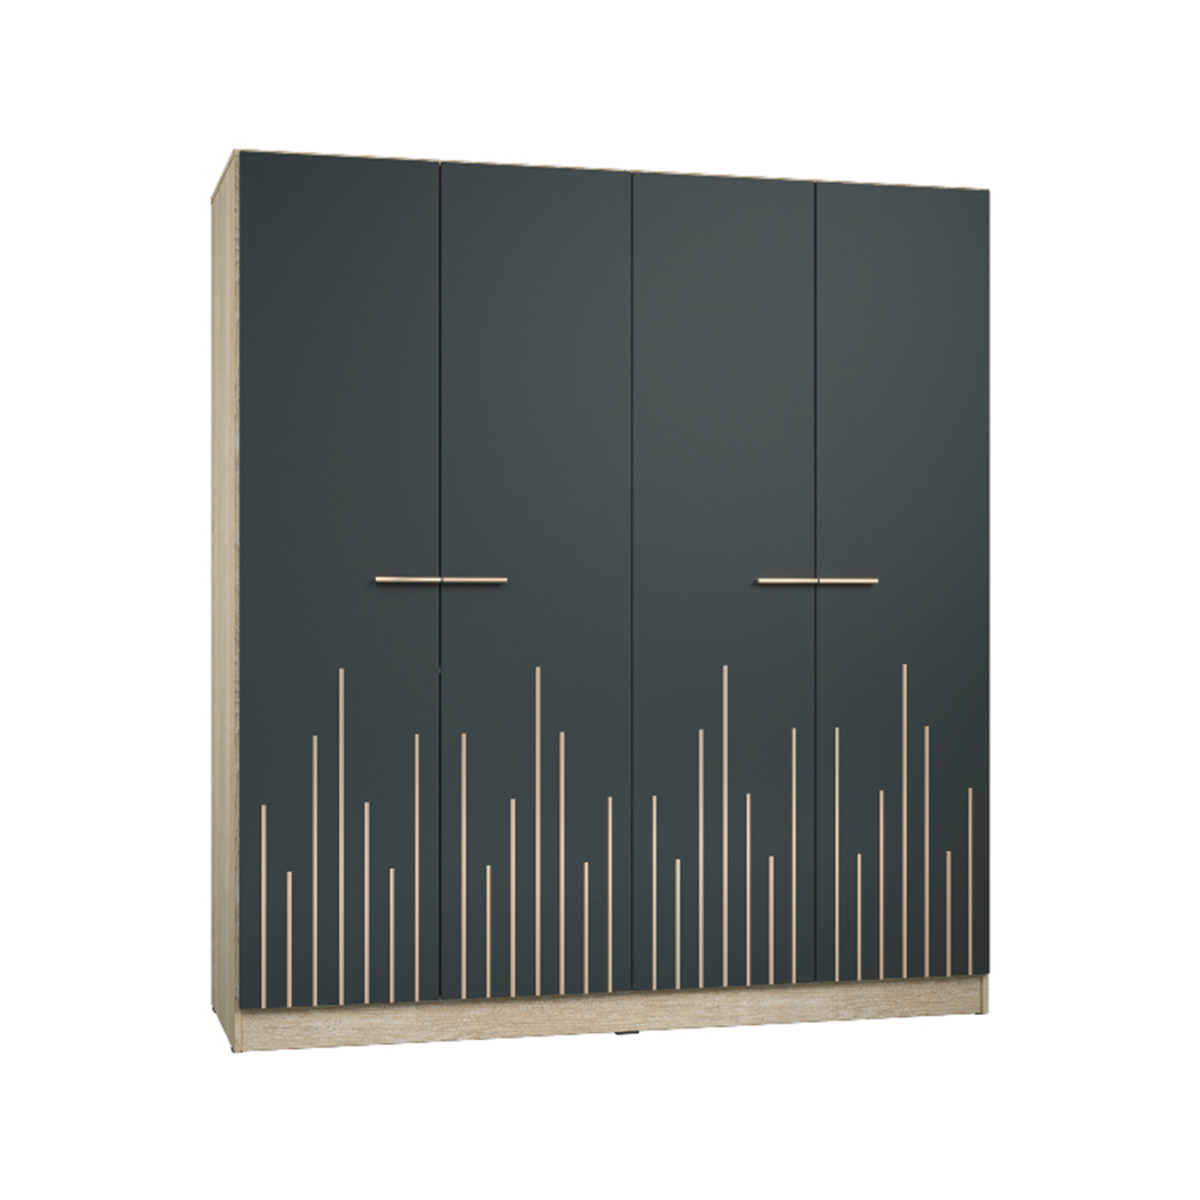 18036::XHB-745::A Sure wardrobe with 4 swing glass doors and 2 drawers. Dimension (WxDxH) cm : 163.8x62x220. Available in Oak SURE Wardrobes SURE Wardrobes SURE Wardrobes